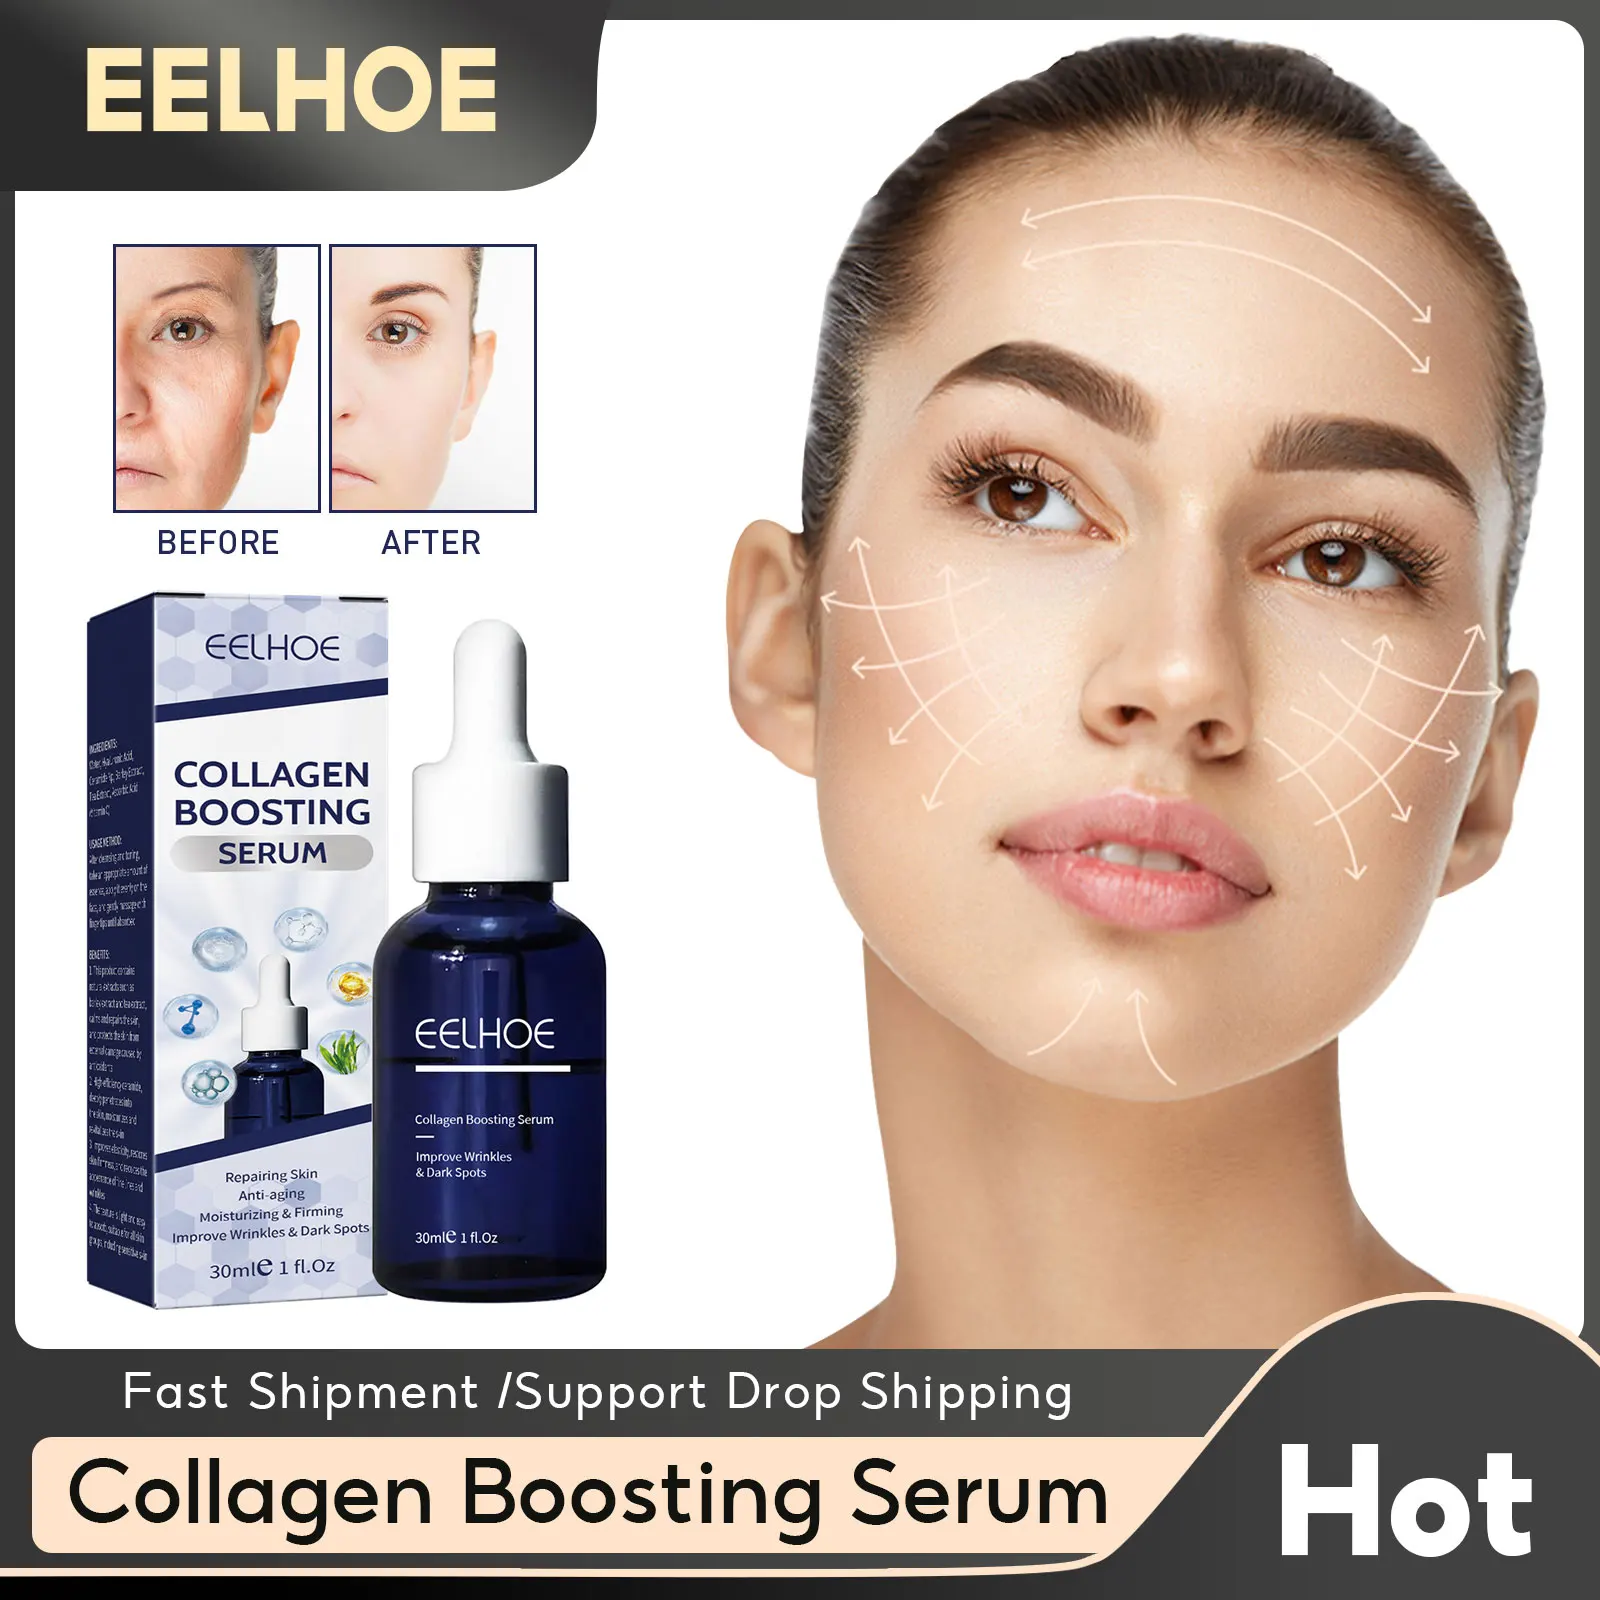 

Collagen Booster Serum Anti Aging Firming Lifting Wrinkle Remover Shrink Pores Moisturize Whitening Hyaluronic Acid Face Essence